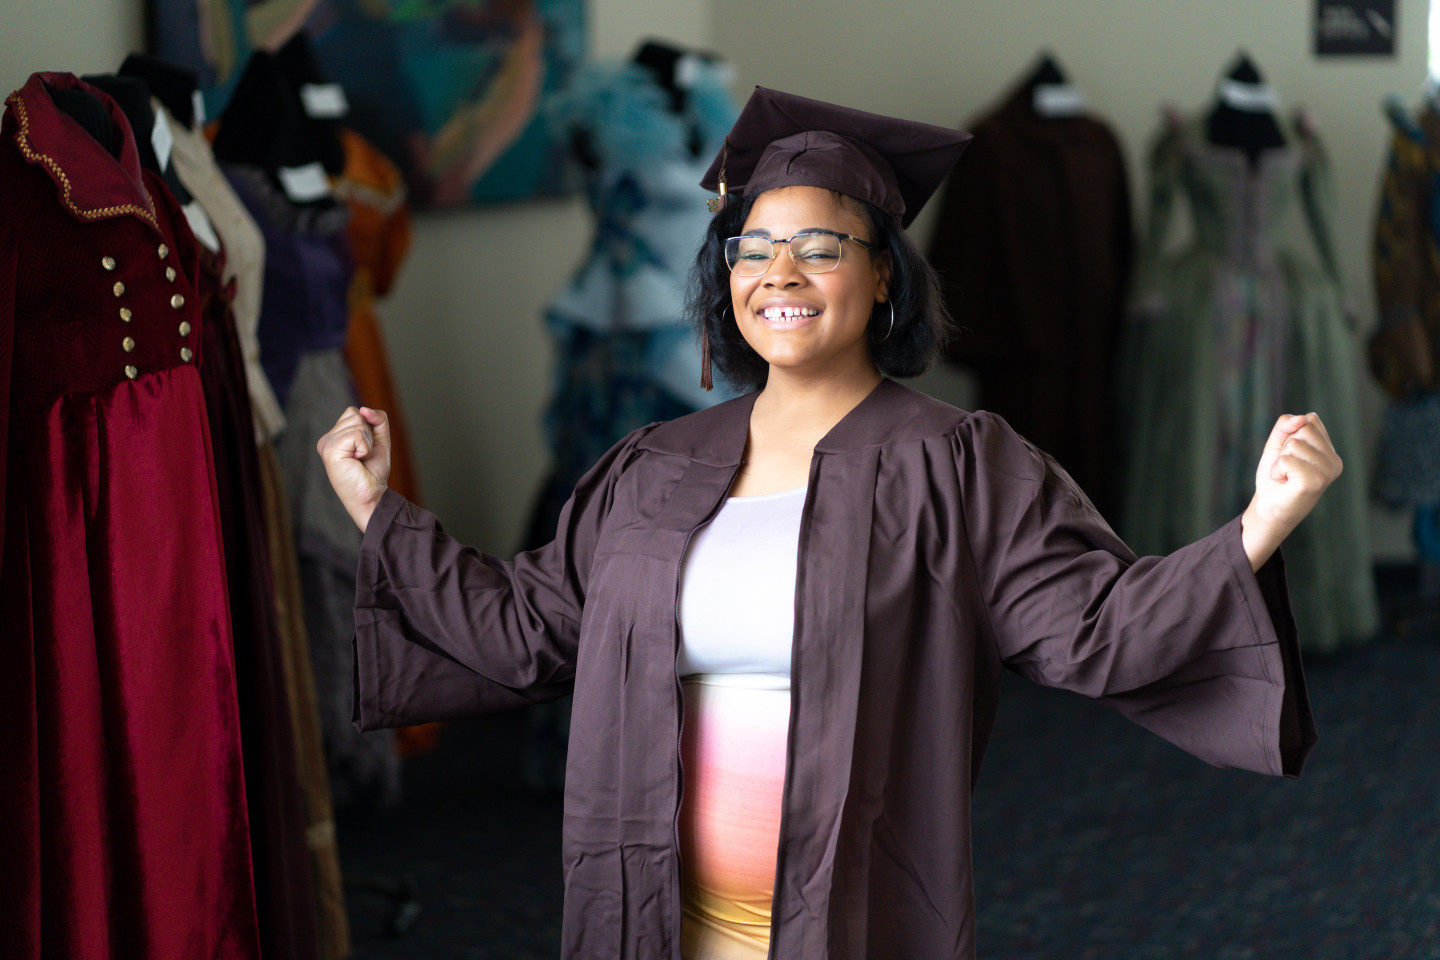 A photo of E.J. Taylor flexing her arms in her graduation attire.